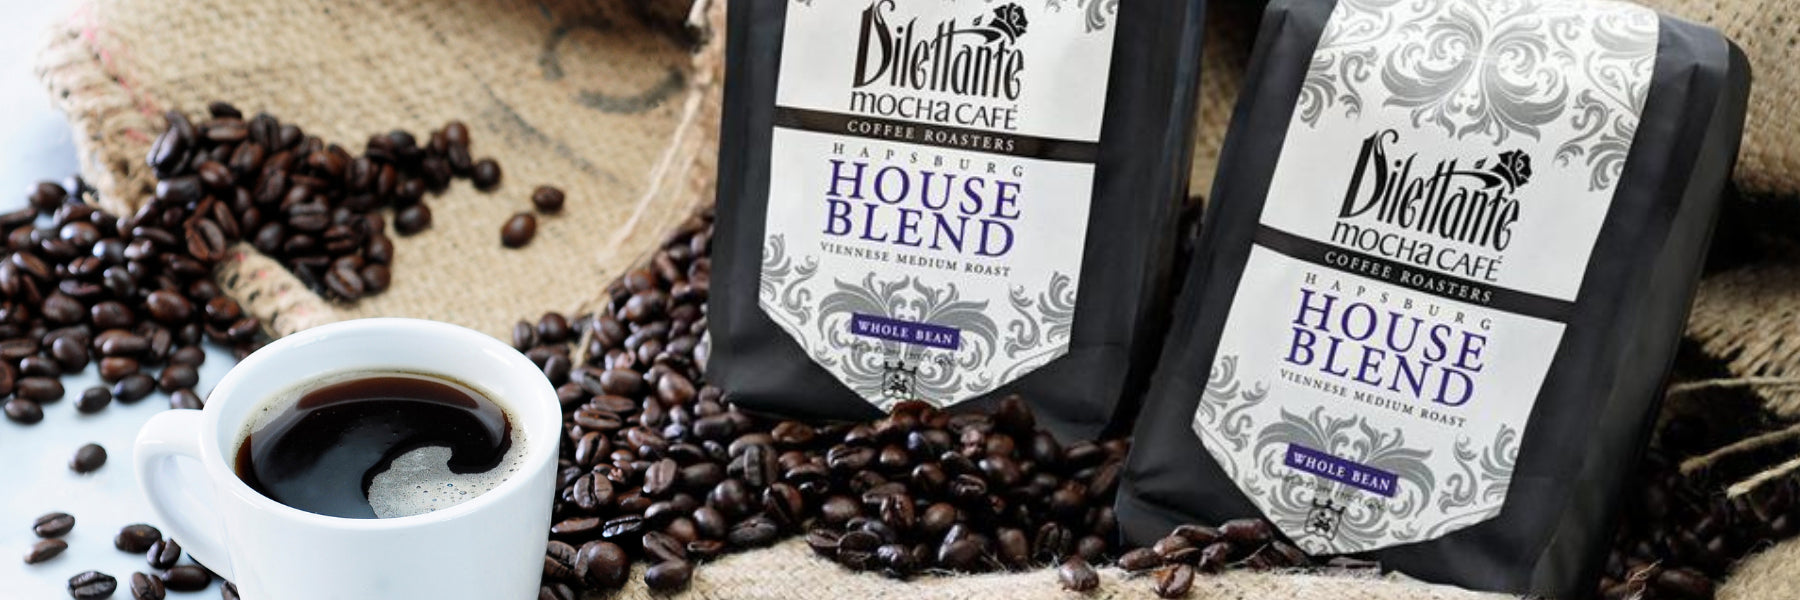 Dilettante Chocolates Hapsburg House Blend of Roasted Espresso Beans